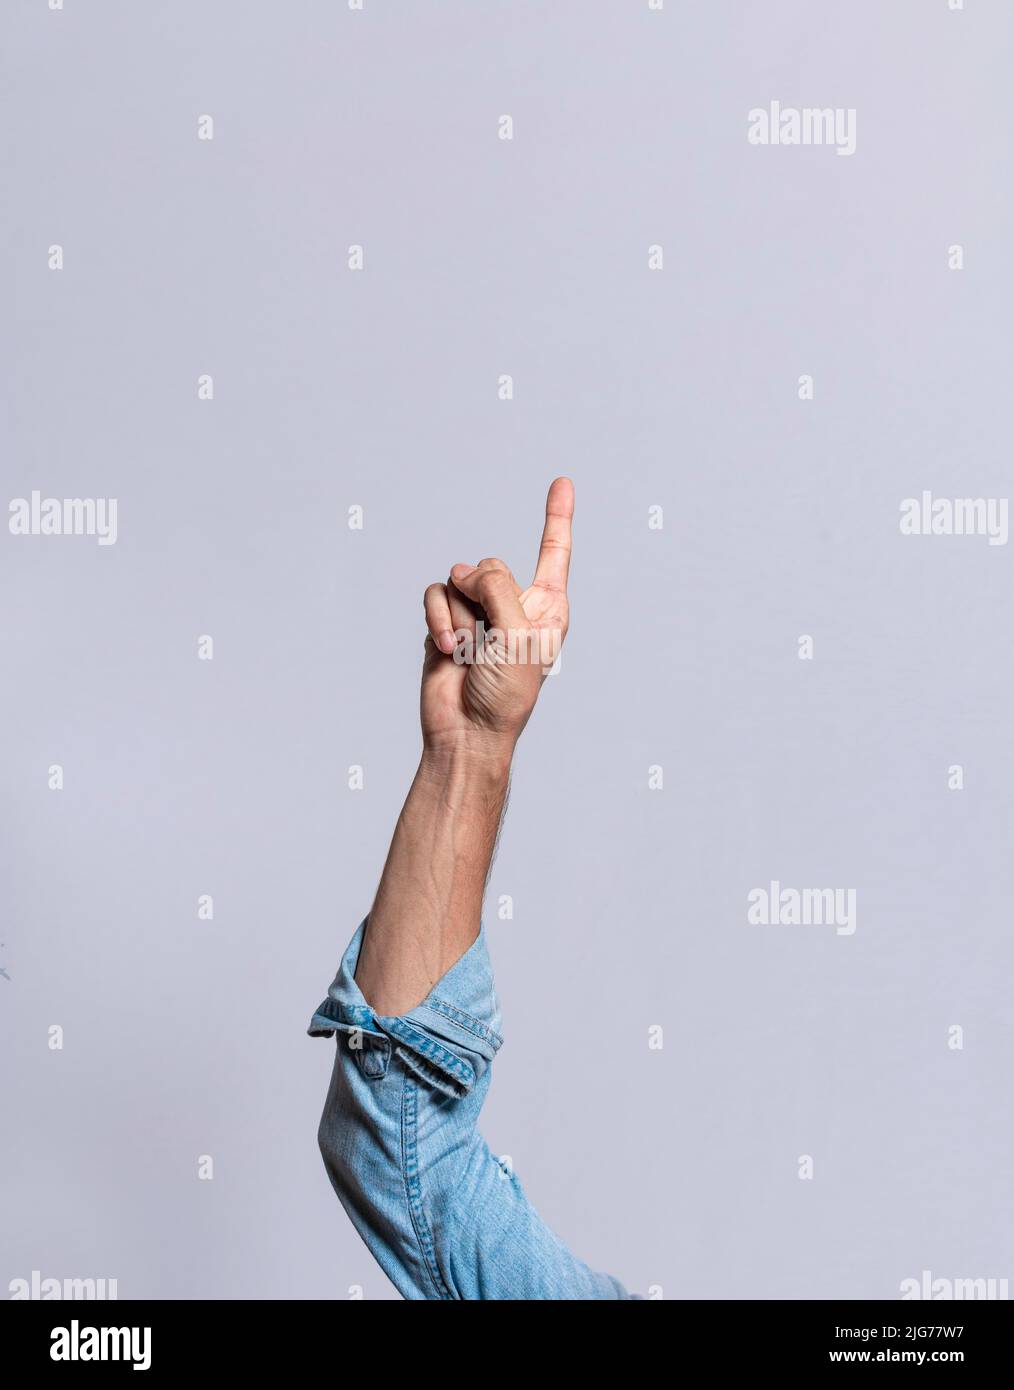 Hand counting number one, Boy hand showing number one, Guy finger counting number one on isolated background Stock Photo